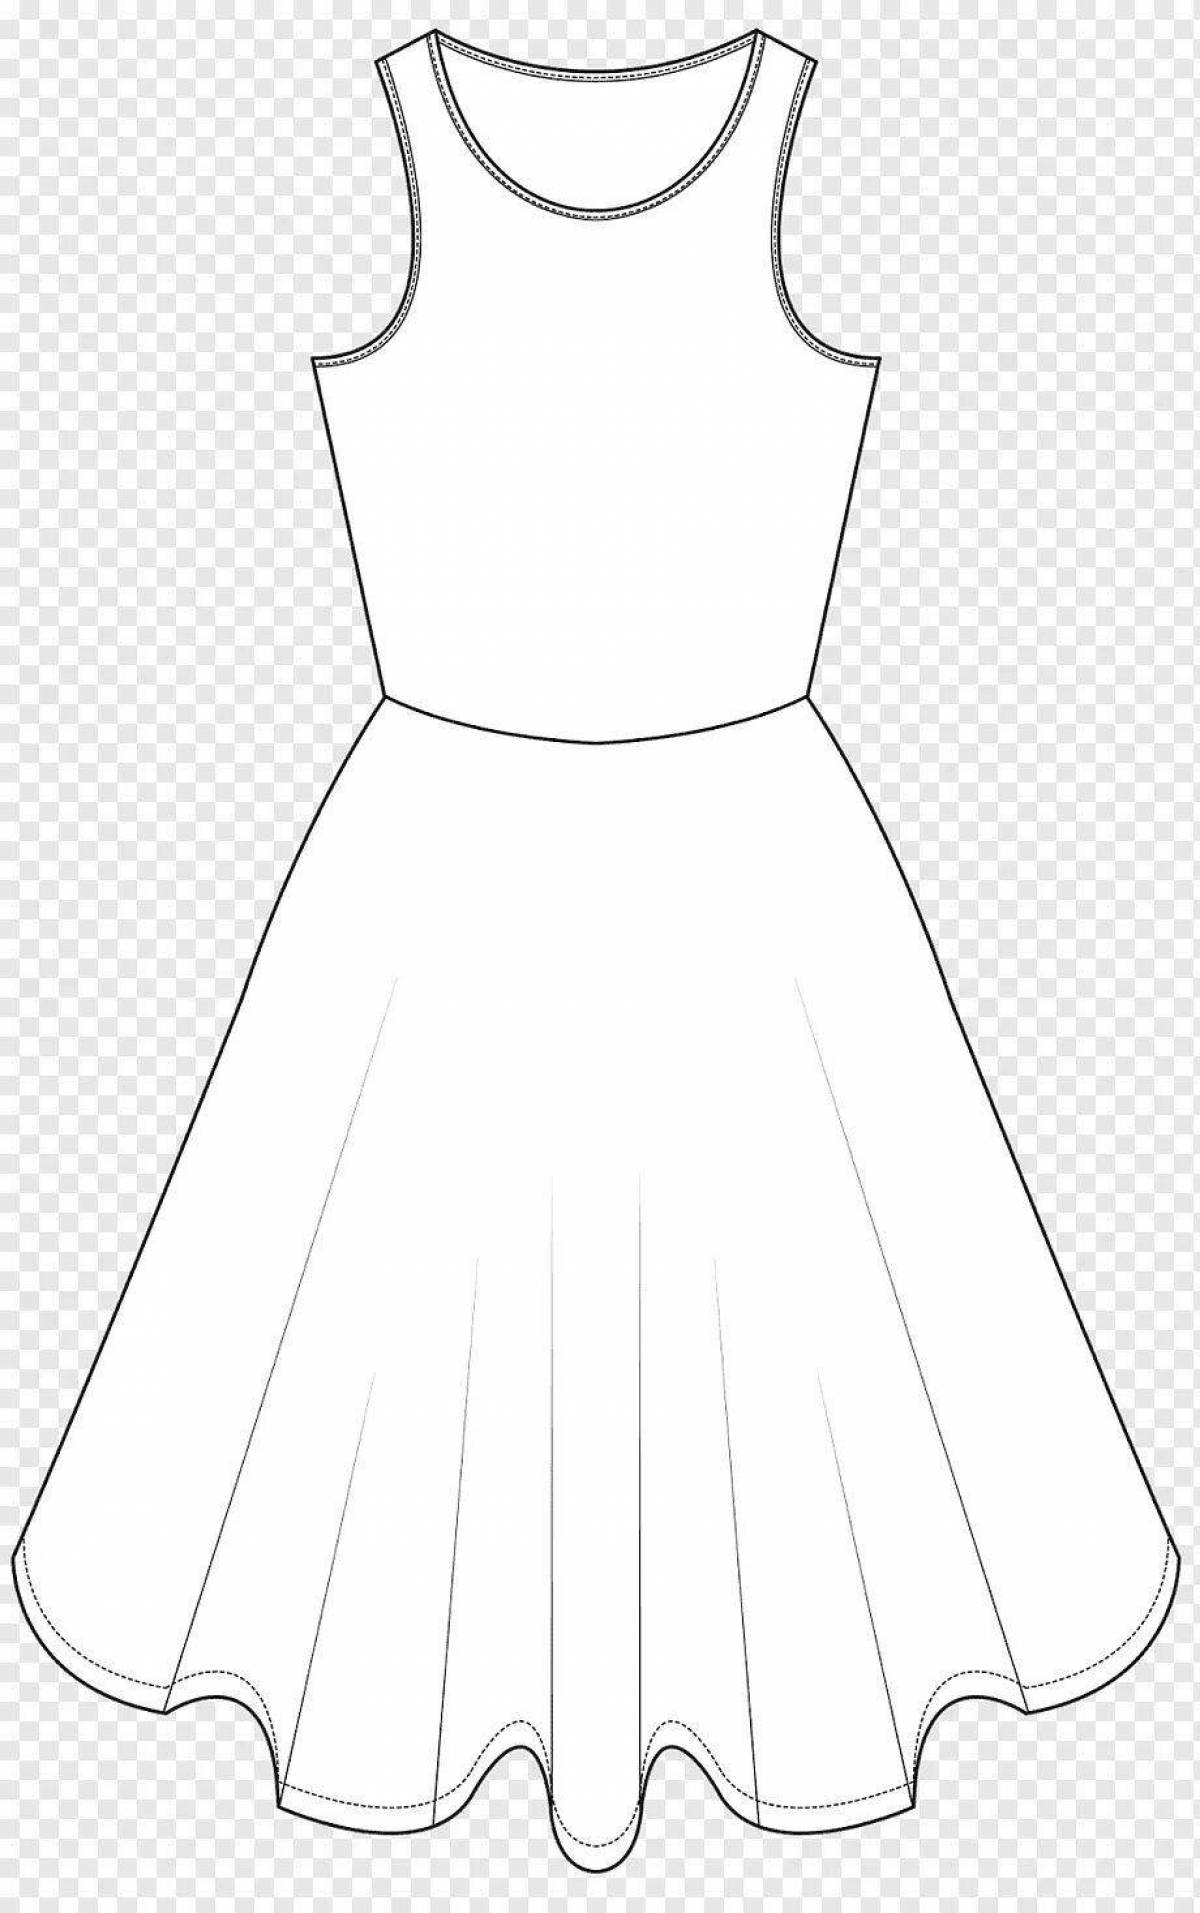 Coloring cute sundress for kids